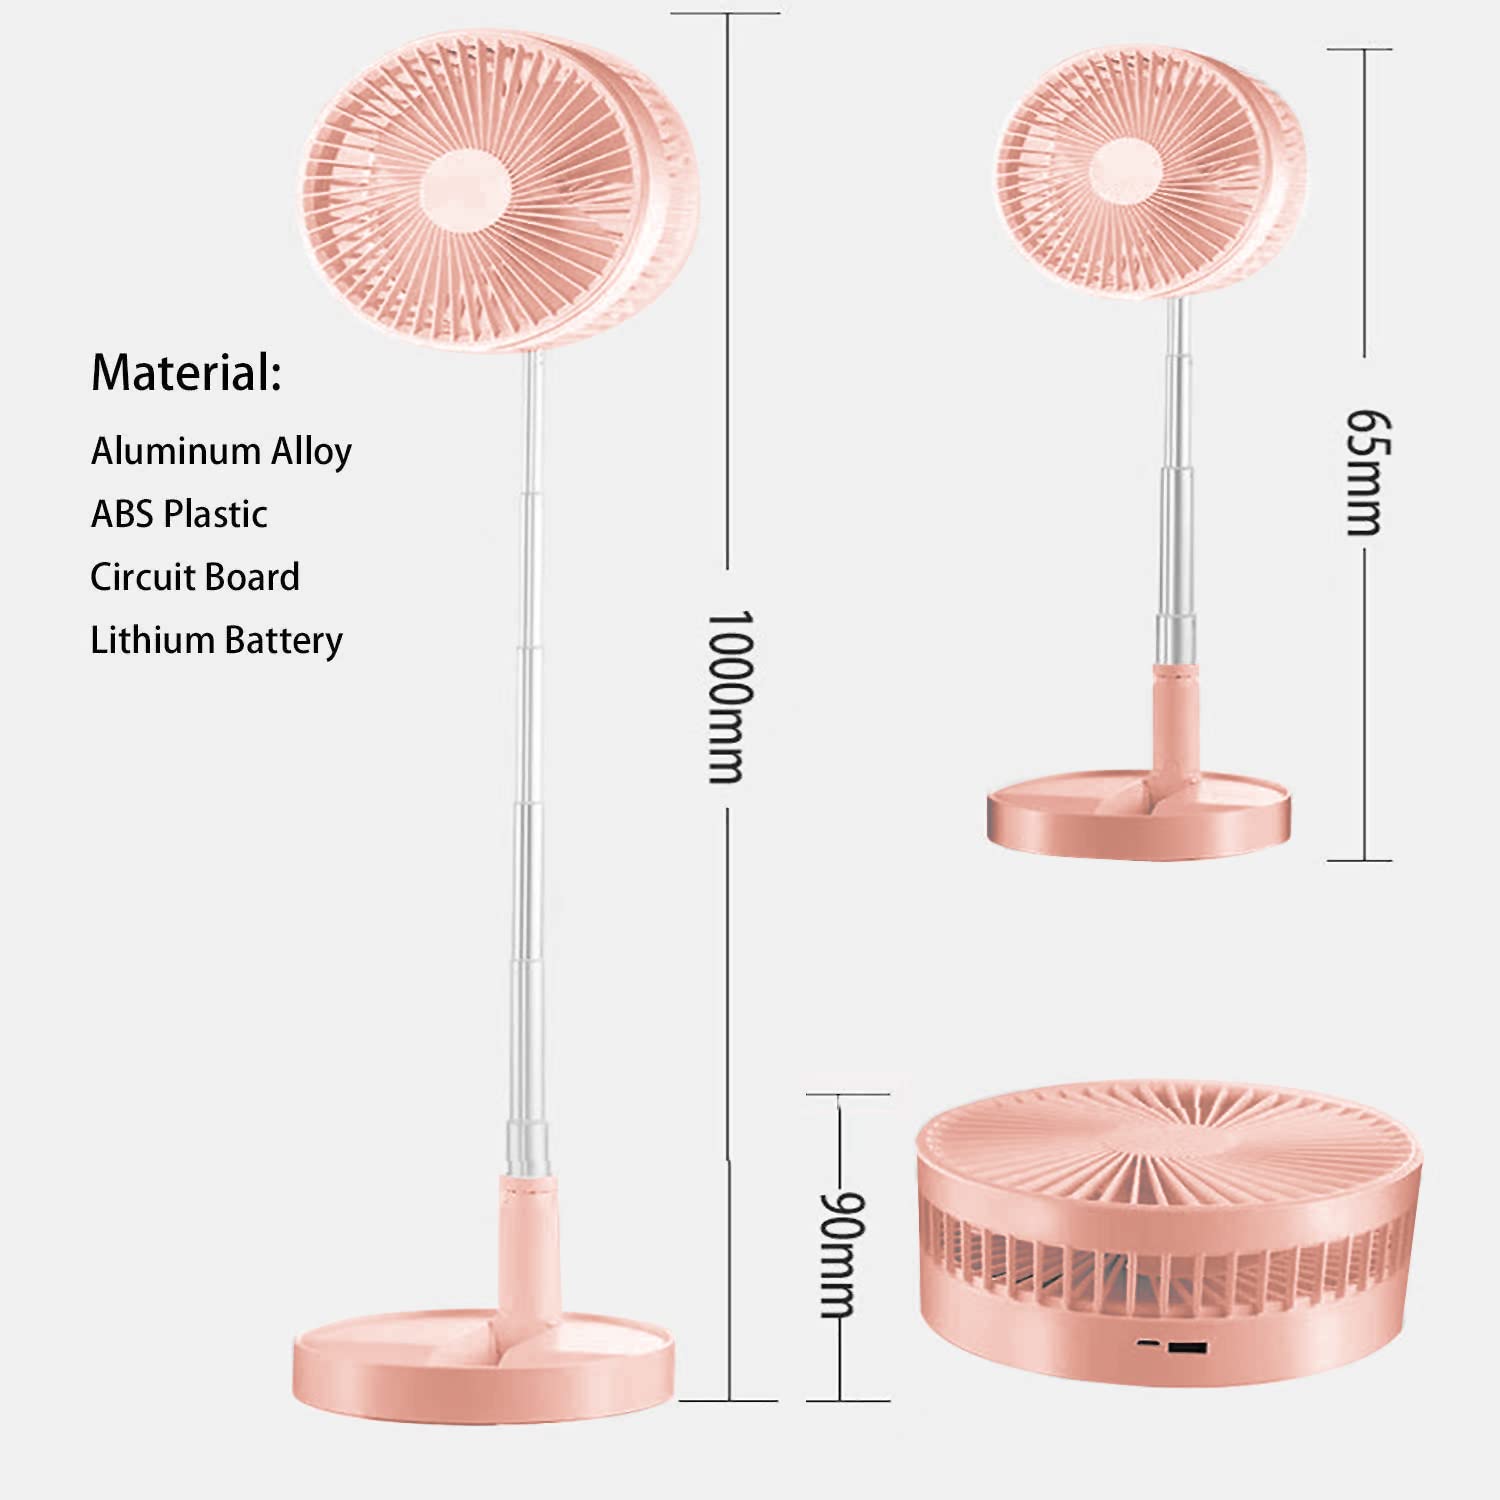 SDYXJ Portable Fan Rechargeable, Stand & Table fan Folding Telescopic & Adjustable Height for Office Home Outdoor Camping (pink)